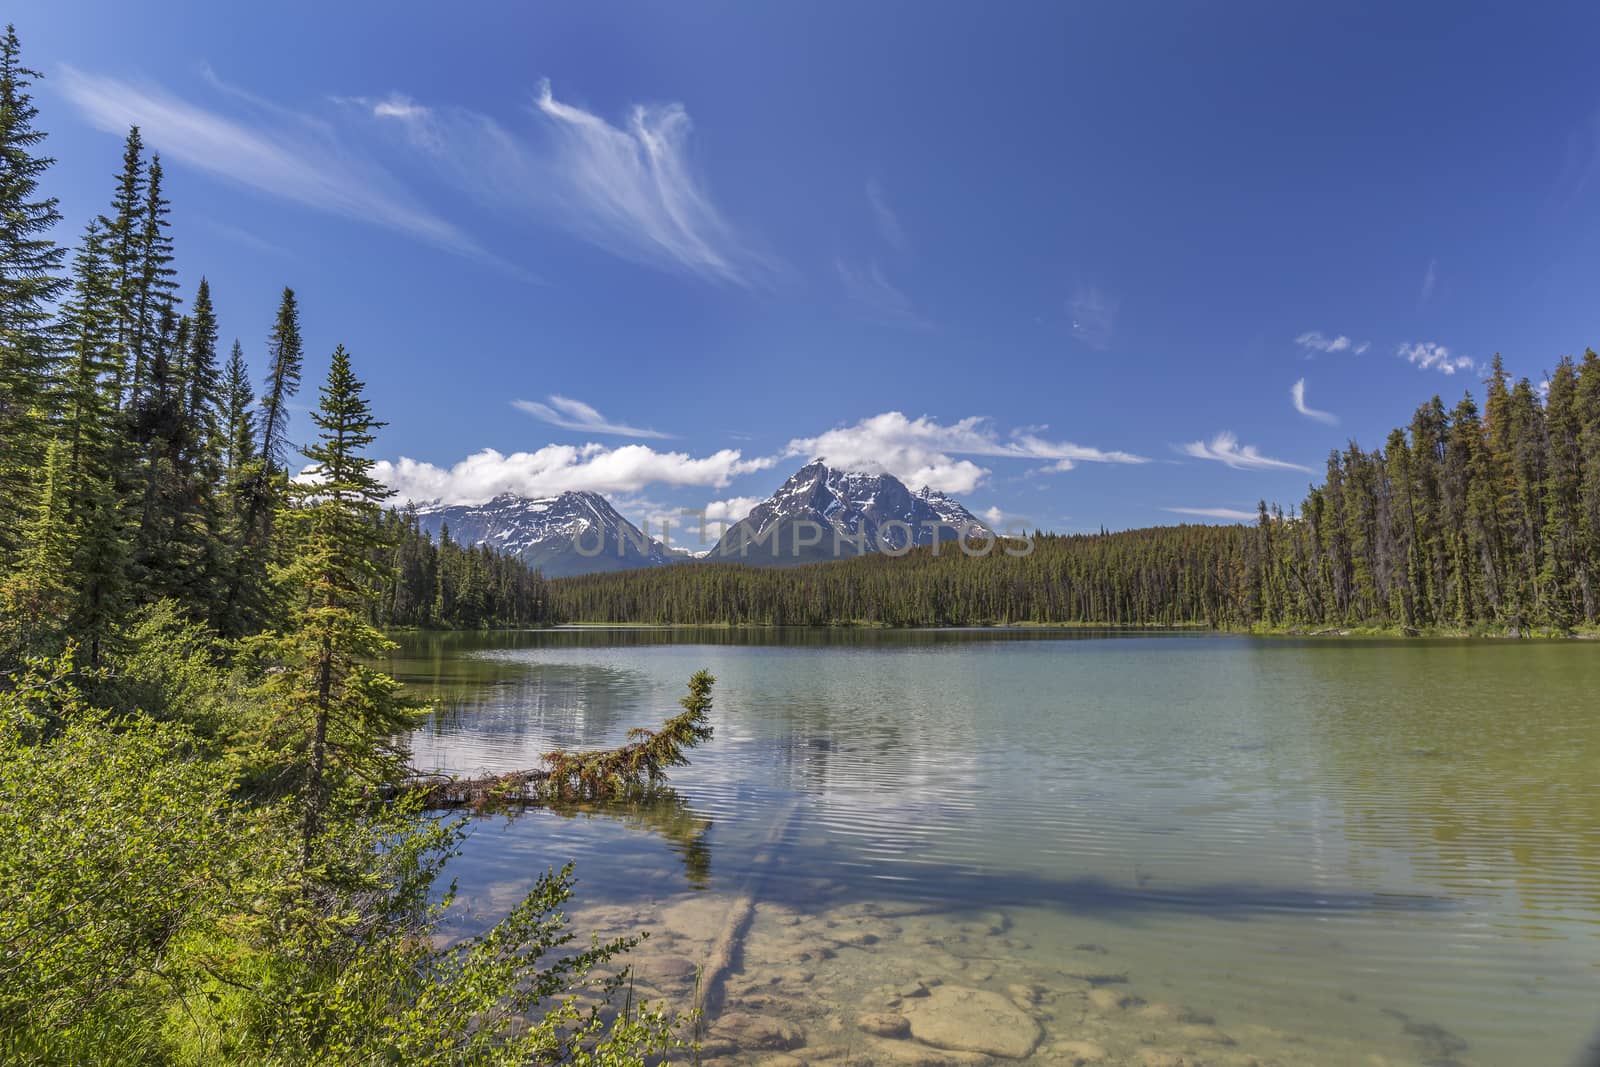 A small lake surrounded by the Rocky Mountains and boreal forest - Jasper National Park, Alberta, Canada